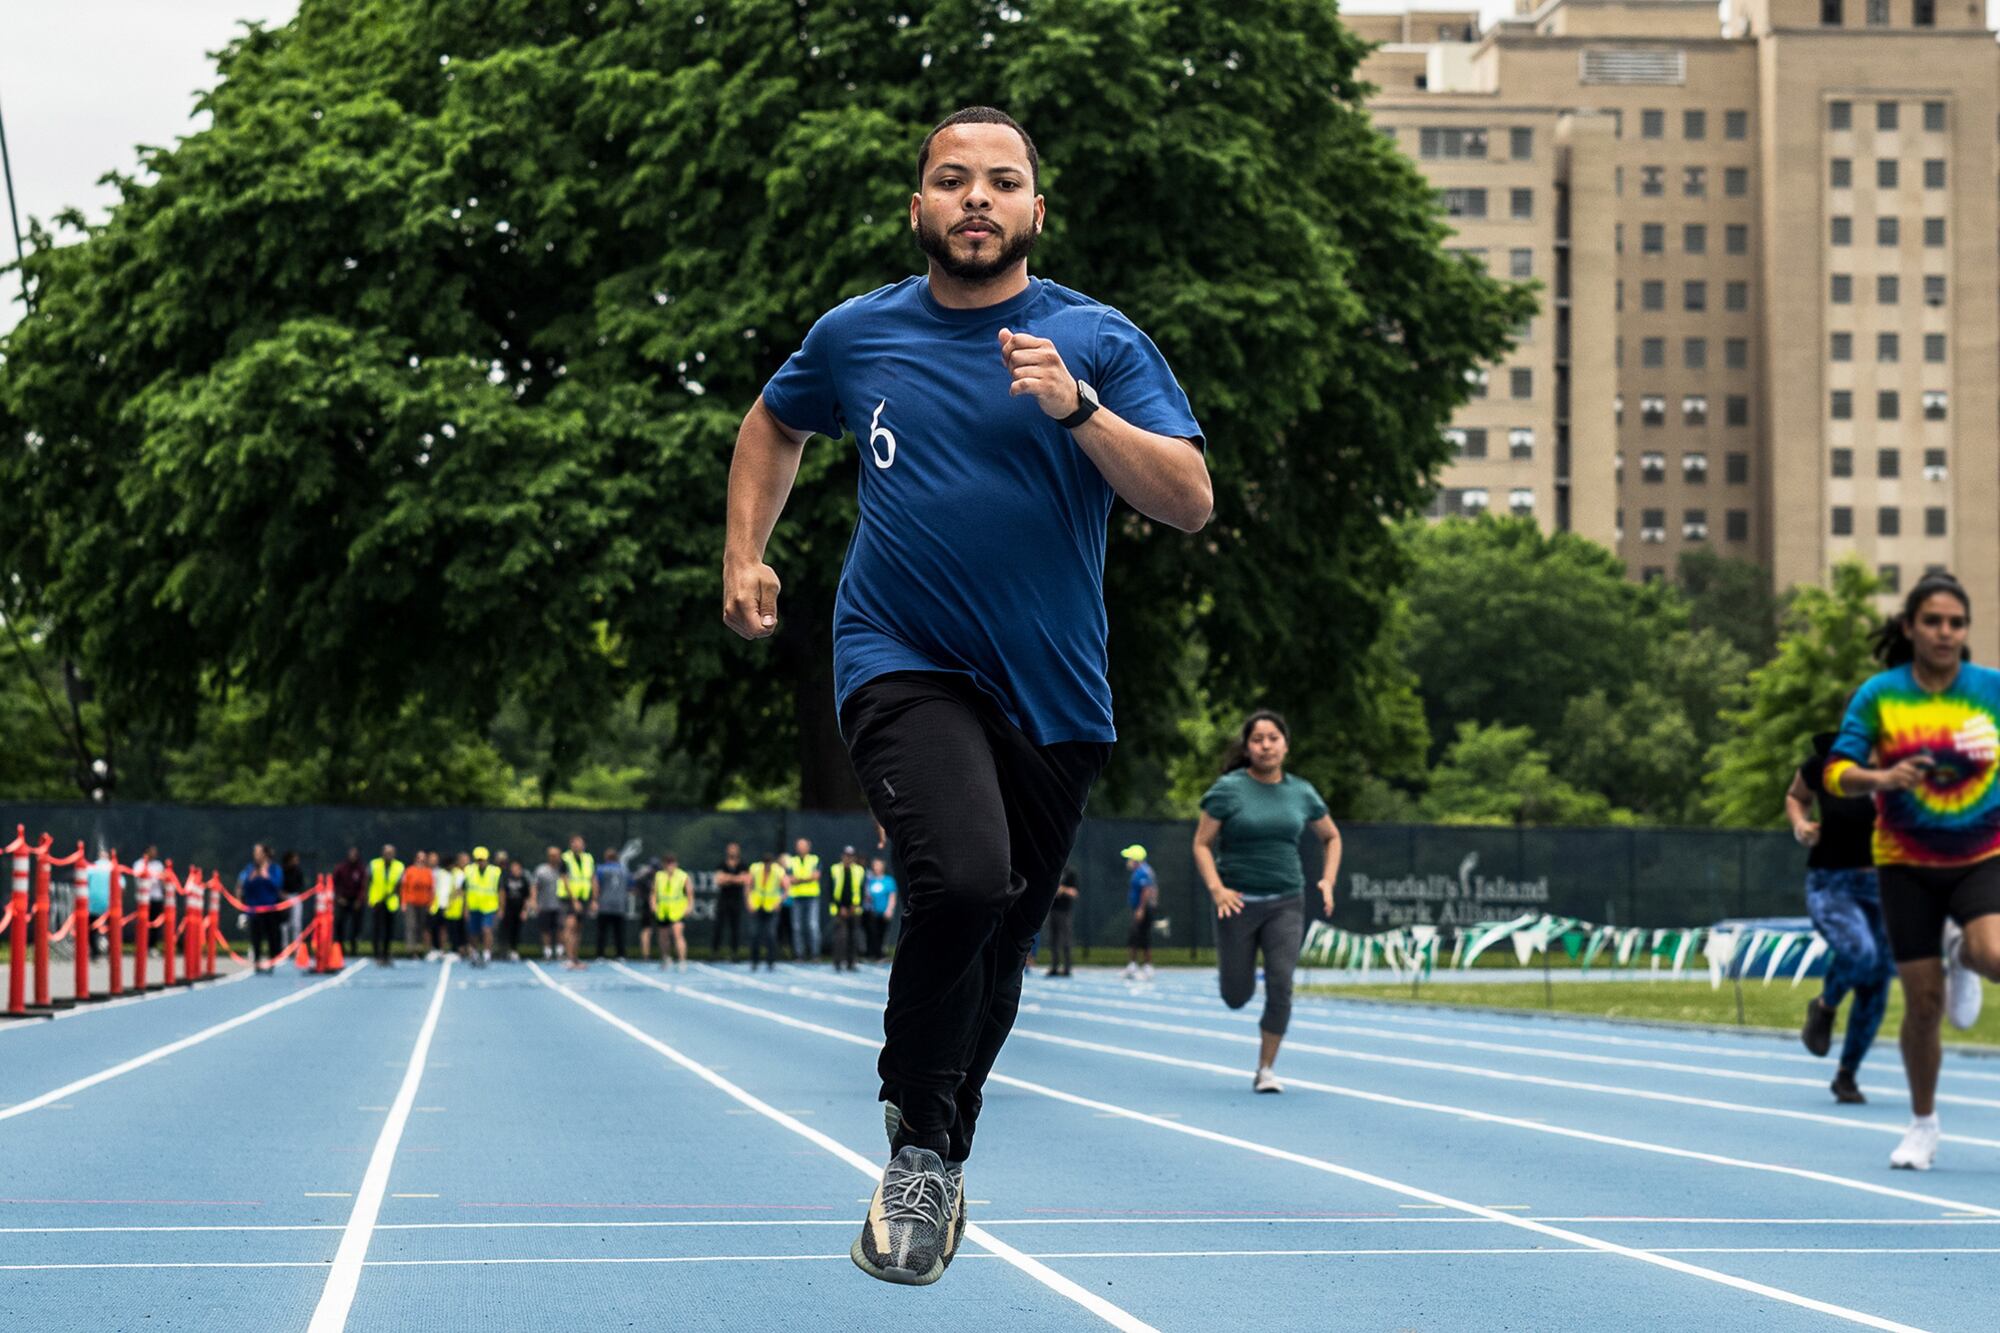 A man in a blue T-shirt and black pant running on a track.